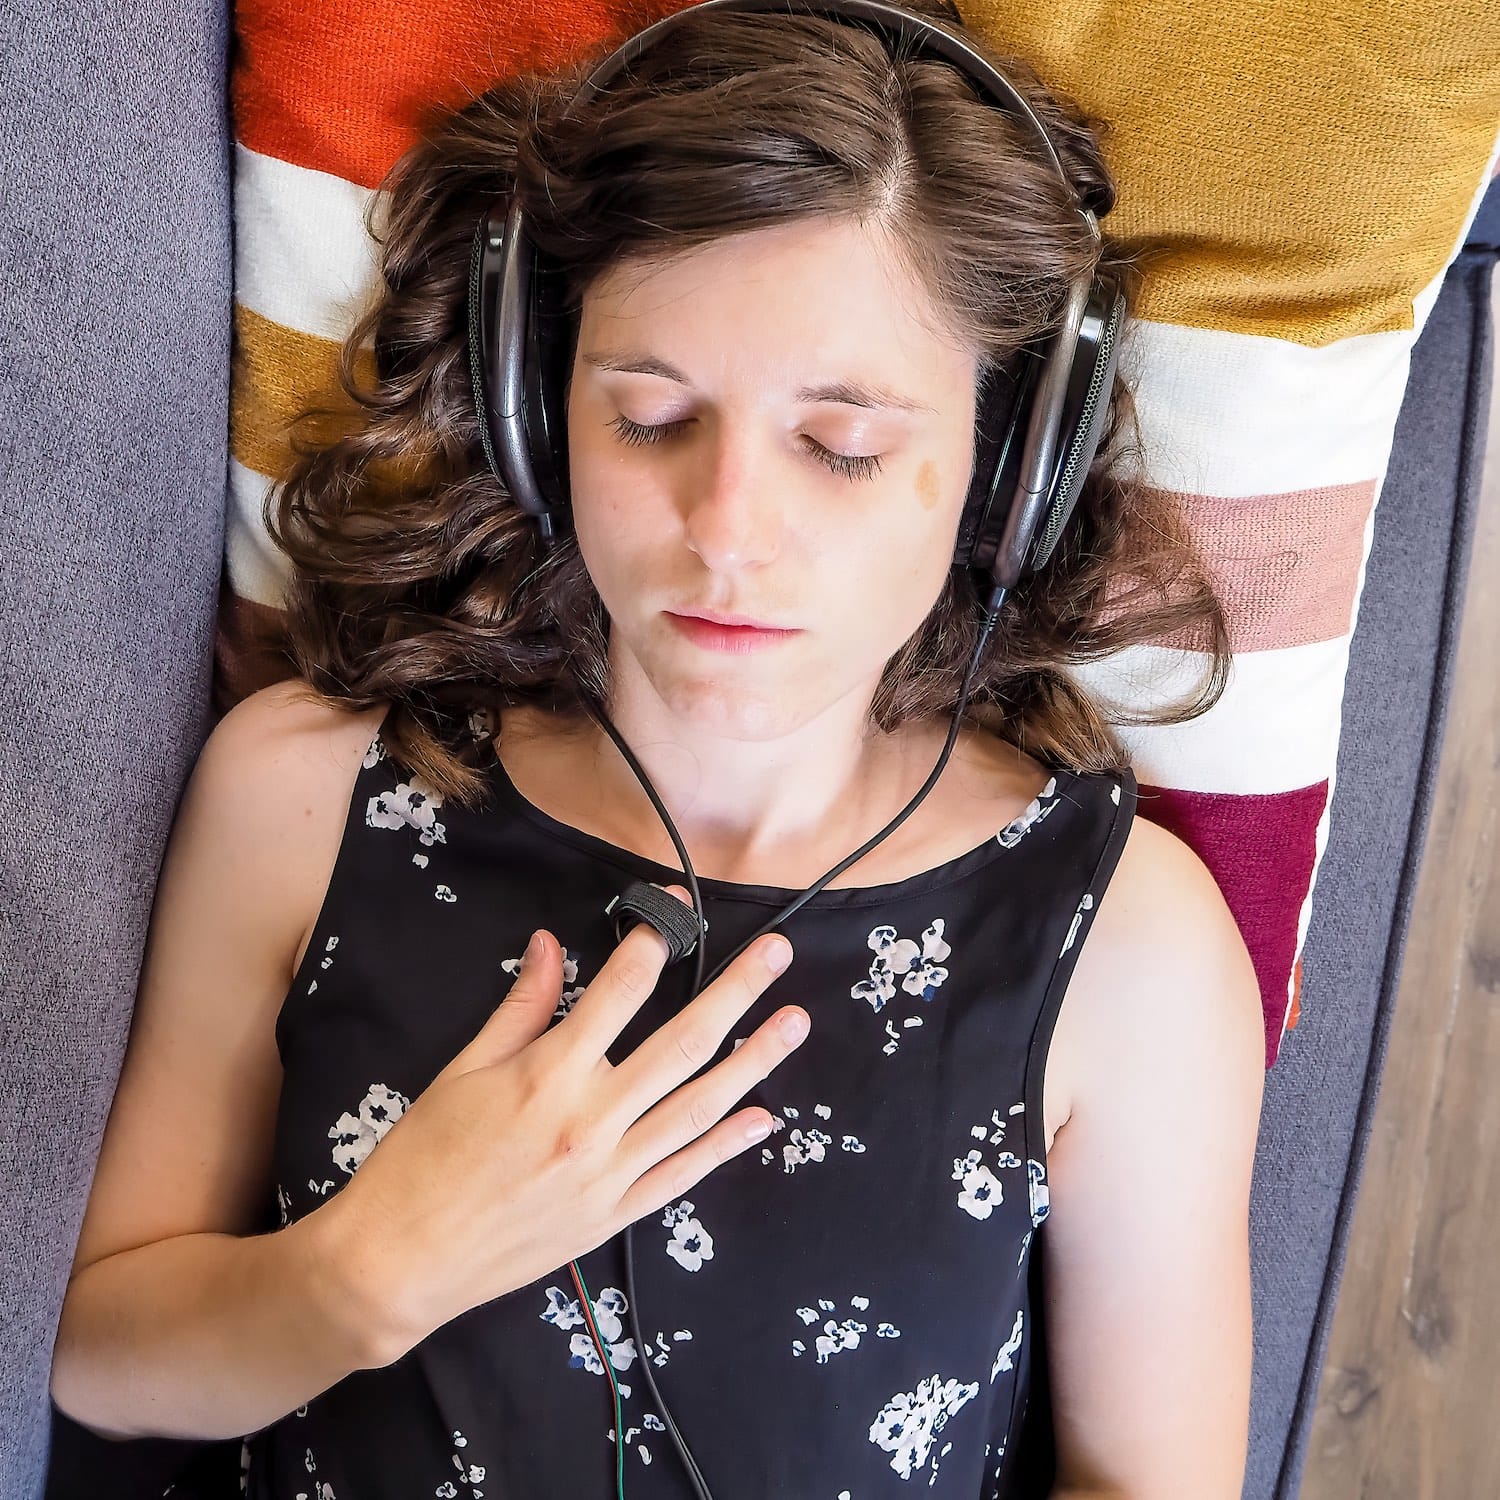 A photo of a woman in dress wearing large headphones and fingertip pulse sensor laying with her eyes closed on top of a blue couch.